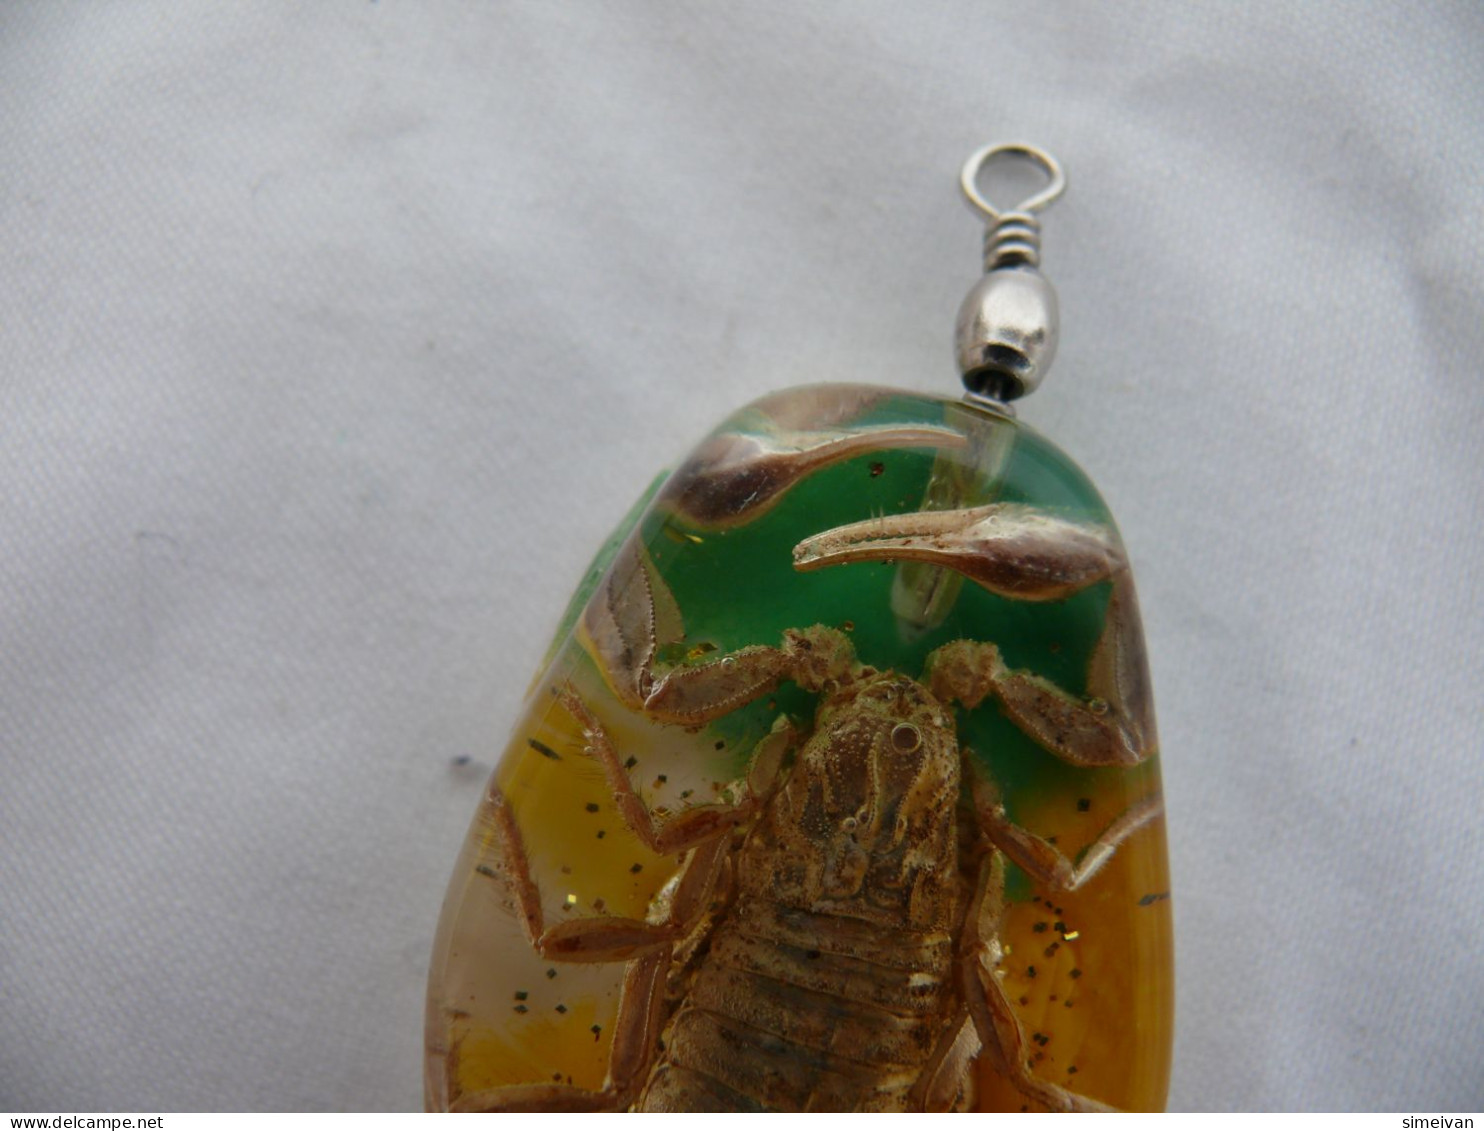 REAL GOLD SCORPION GLOW LUCITE NECKLACE PENDANT INSECT JEWELRY TAXIDERMY #1851 - Pendants